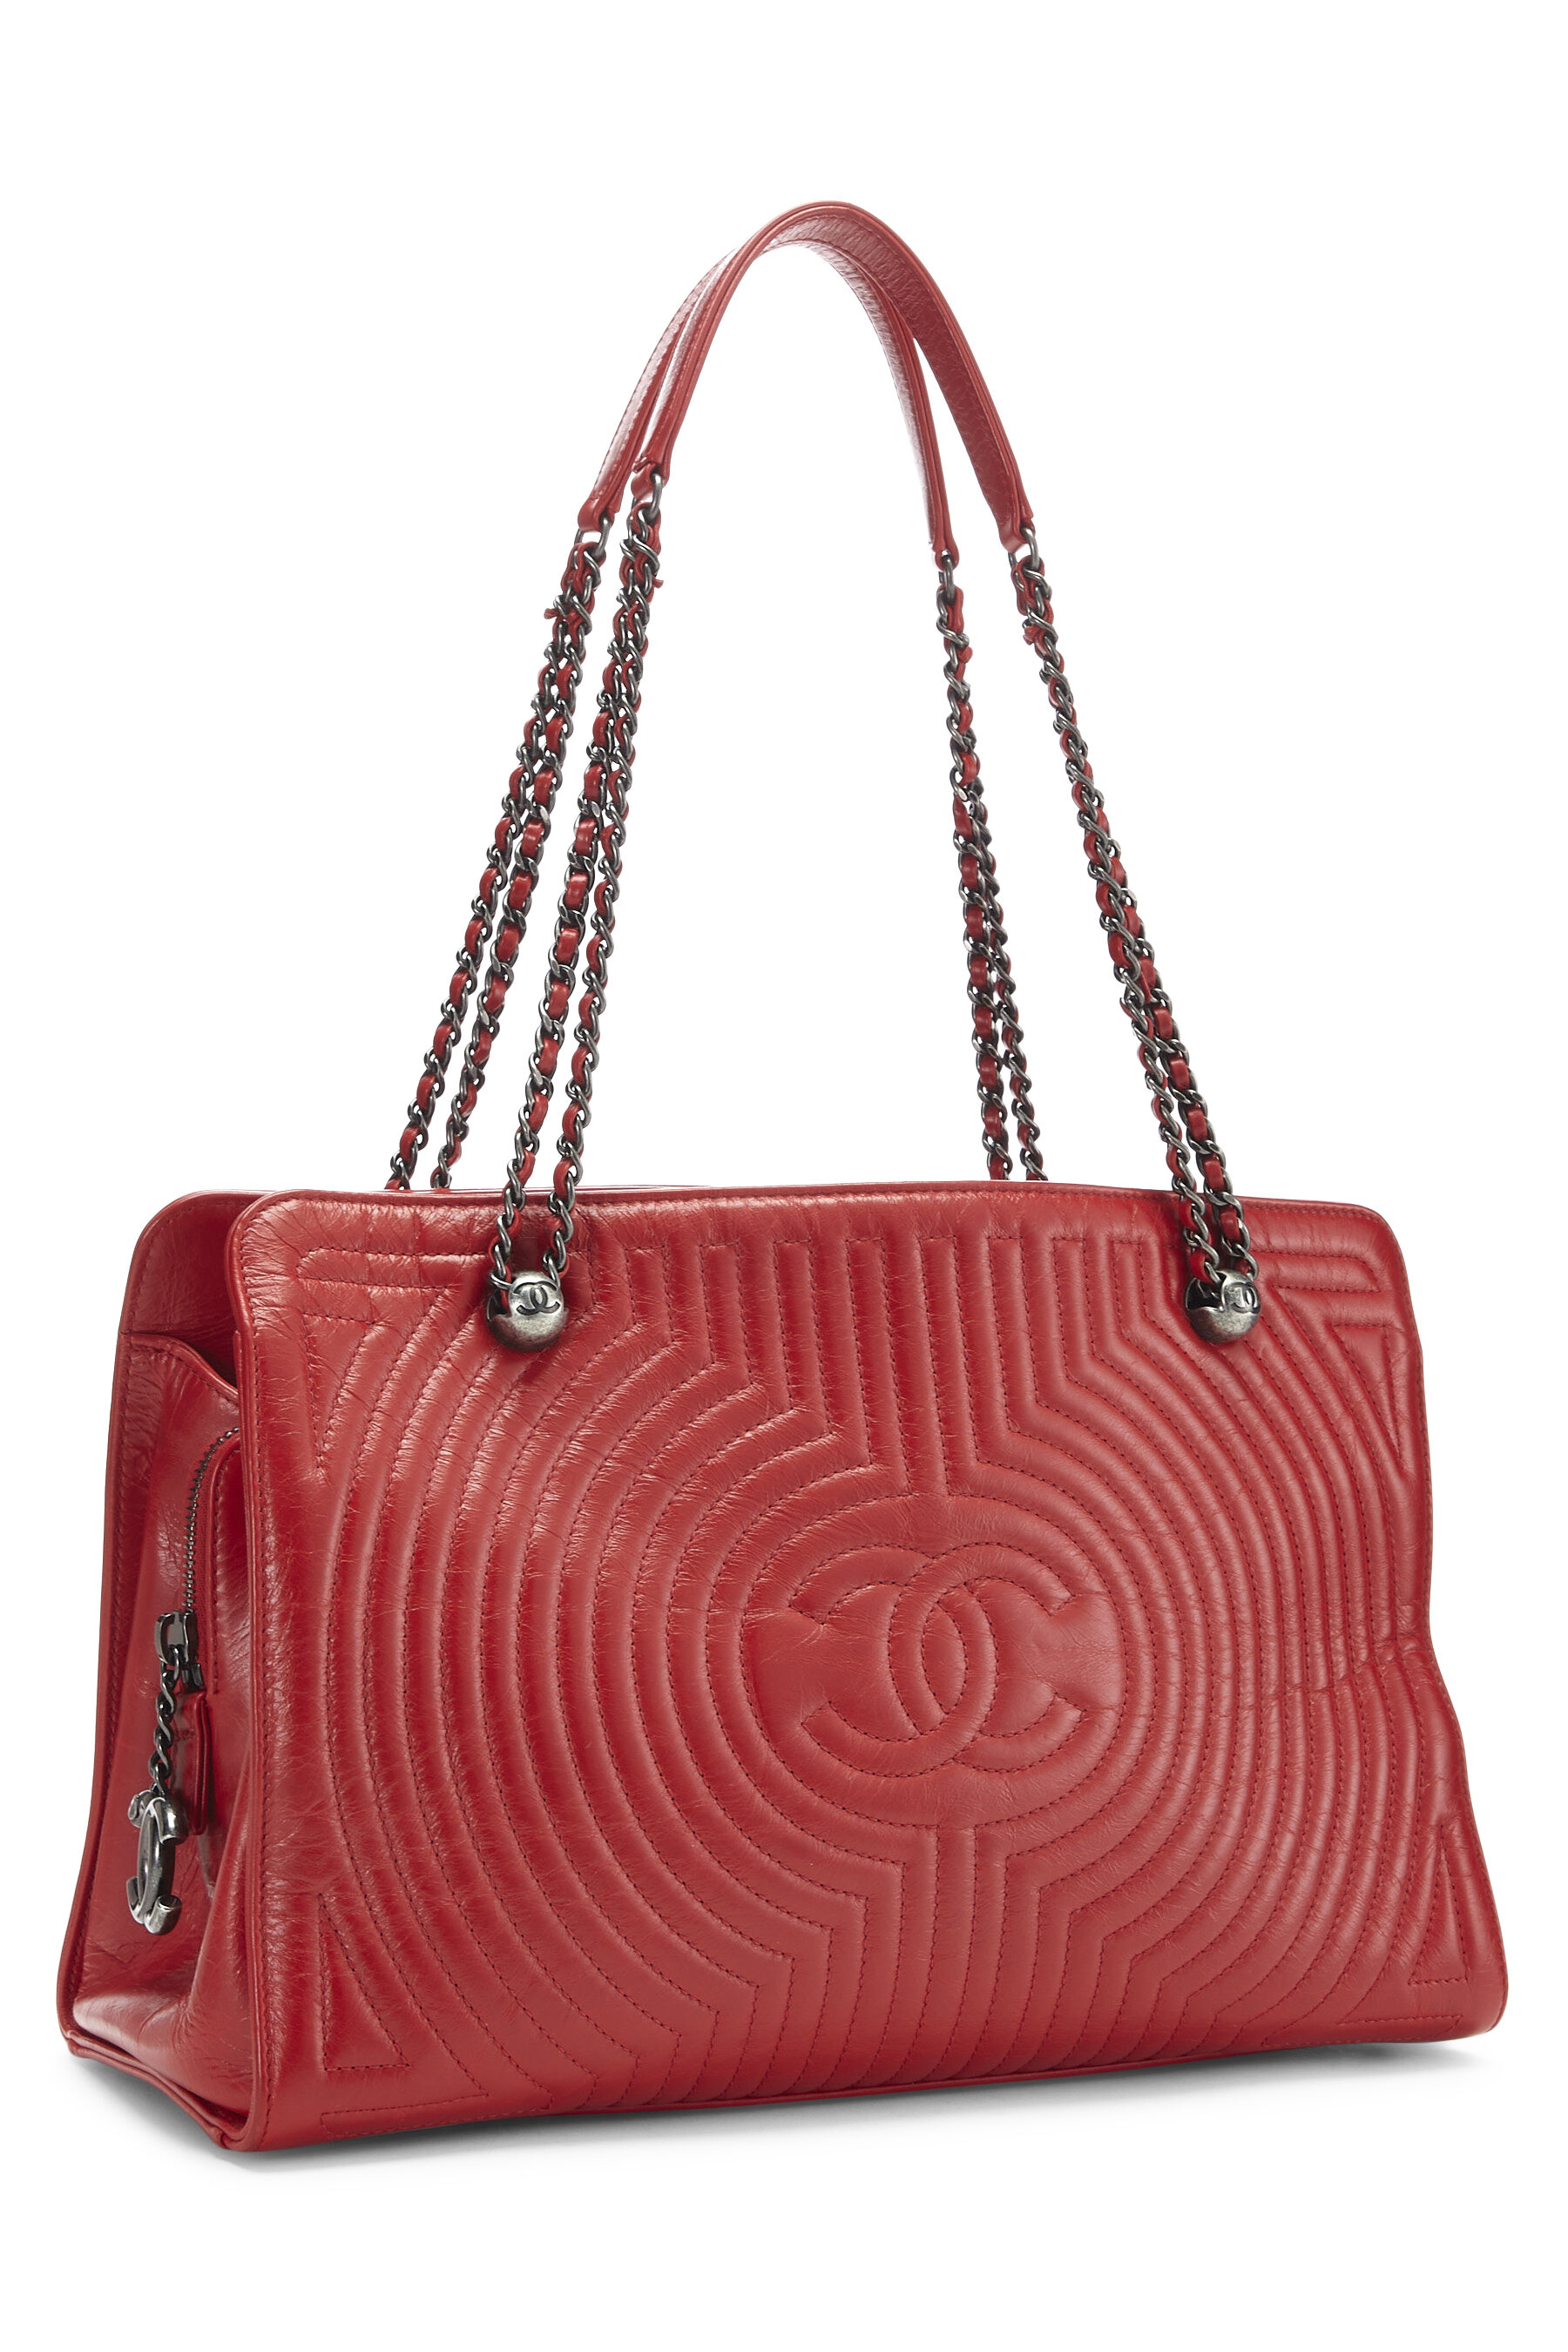 Chanel - Red Quilted Calfskin Korean Garden Tote Large